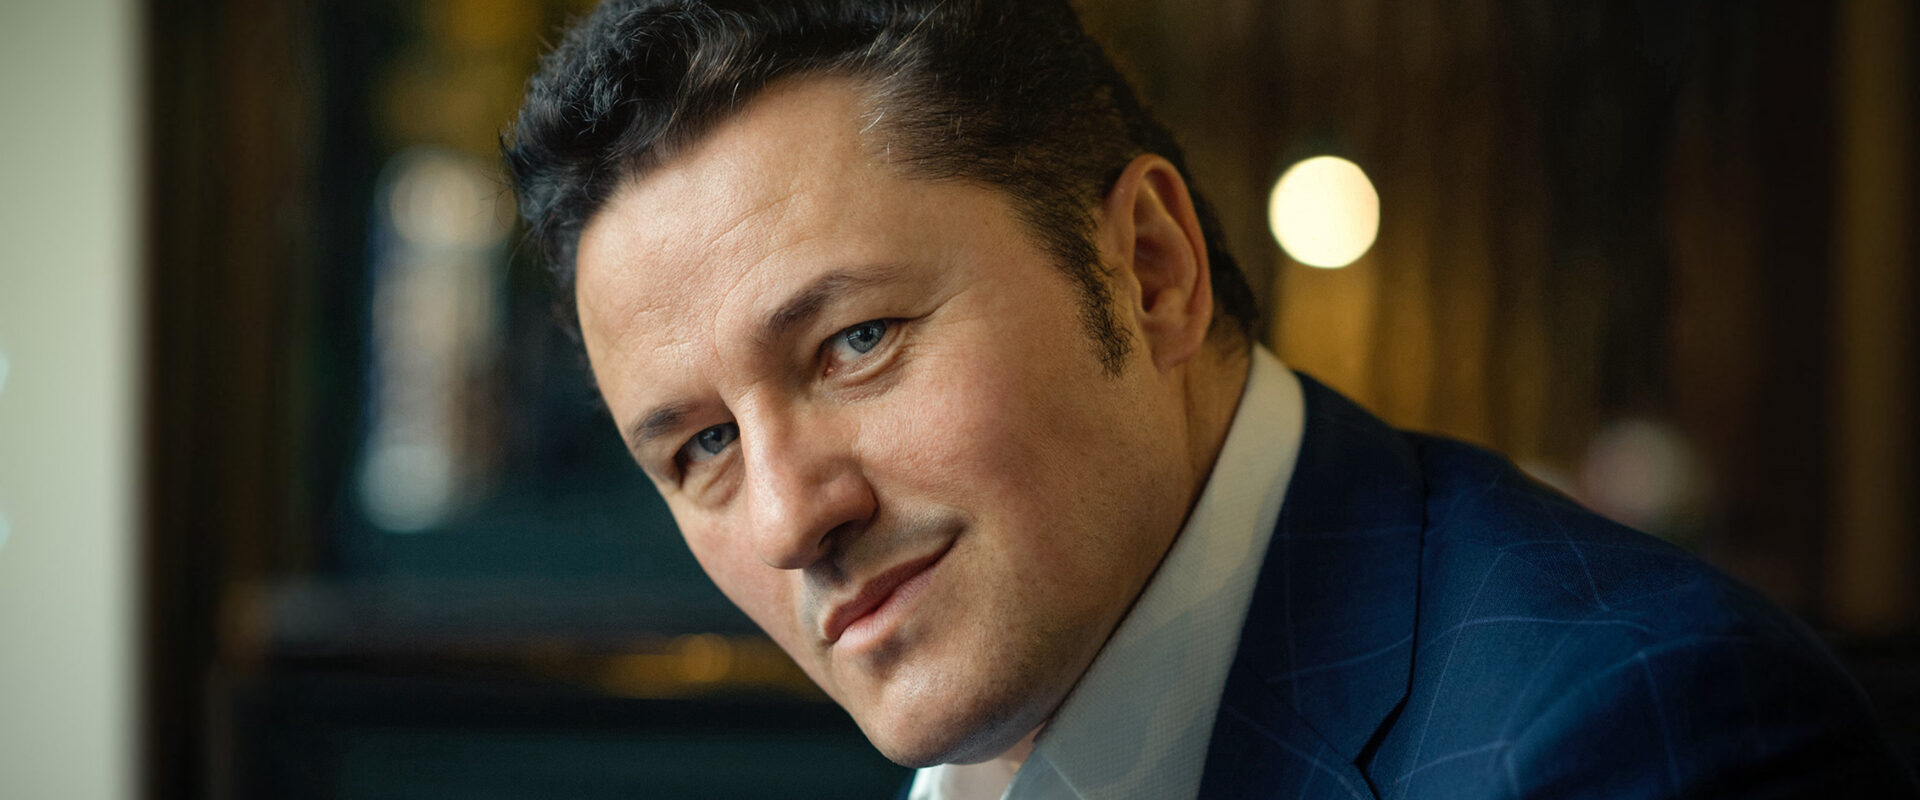 Piotr Beczała sings title role in Gounod’s “Faust” at the Vienna Staatsoper